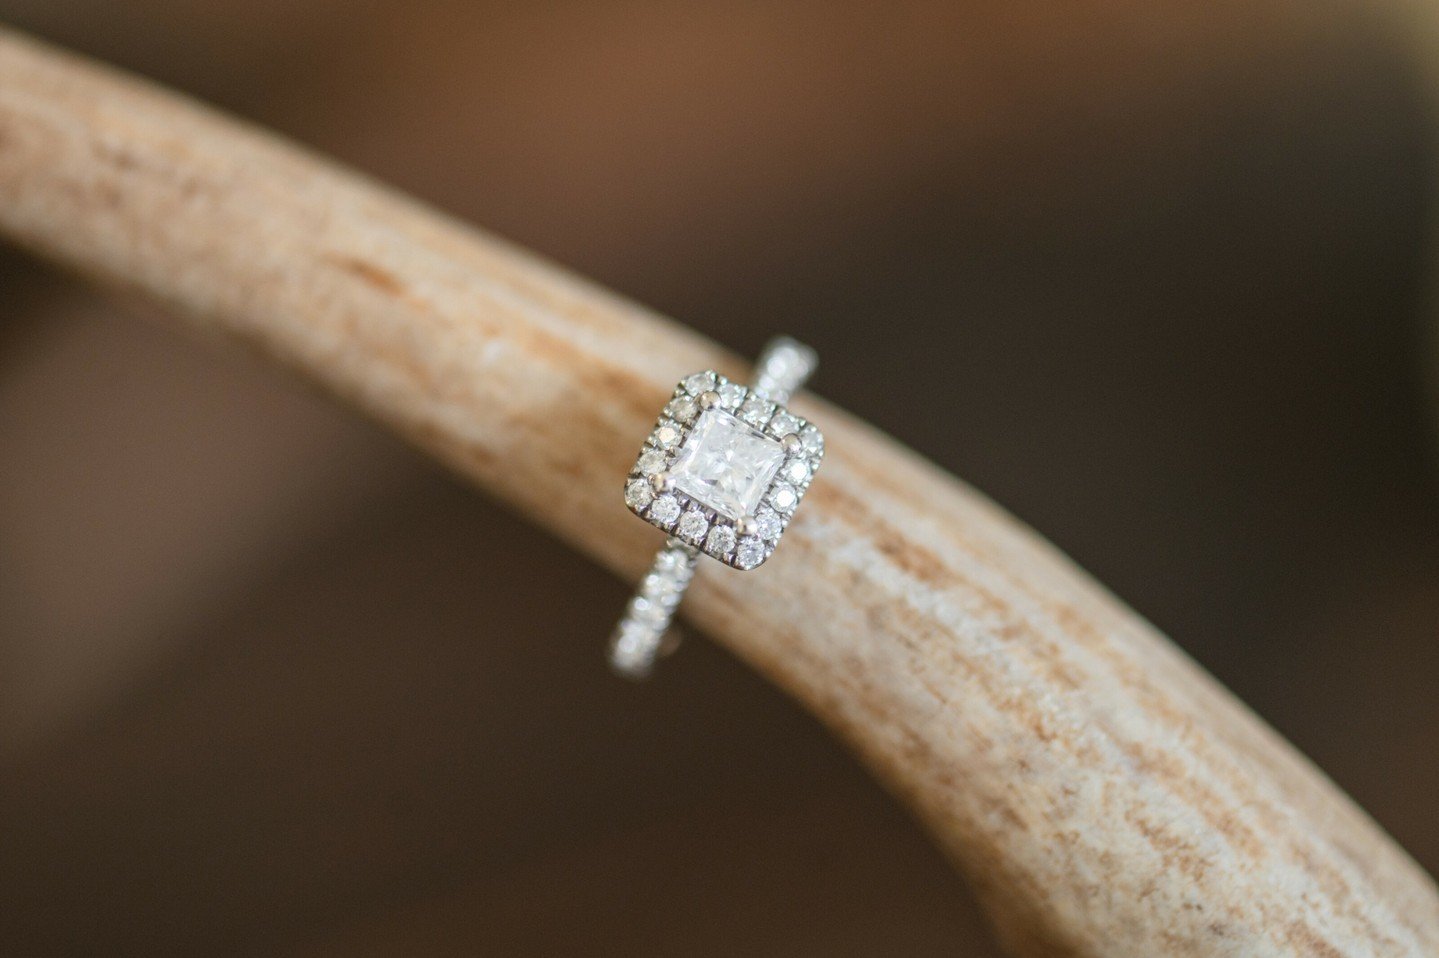 Anyone wanna take a wild guess about what we used to stage Logan's engagement ring?  It's definitely something meaningful to her fiance! 😆
*
*
*
*
*
#kimberlycaublephotography #scweddingphotographer #ncweddingphotographer #charlotteweddingphotograph